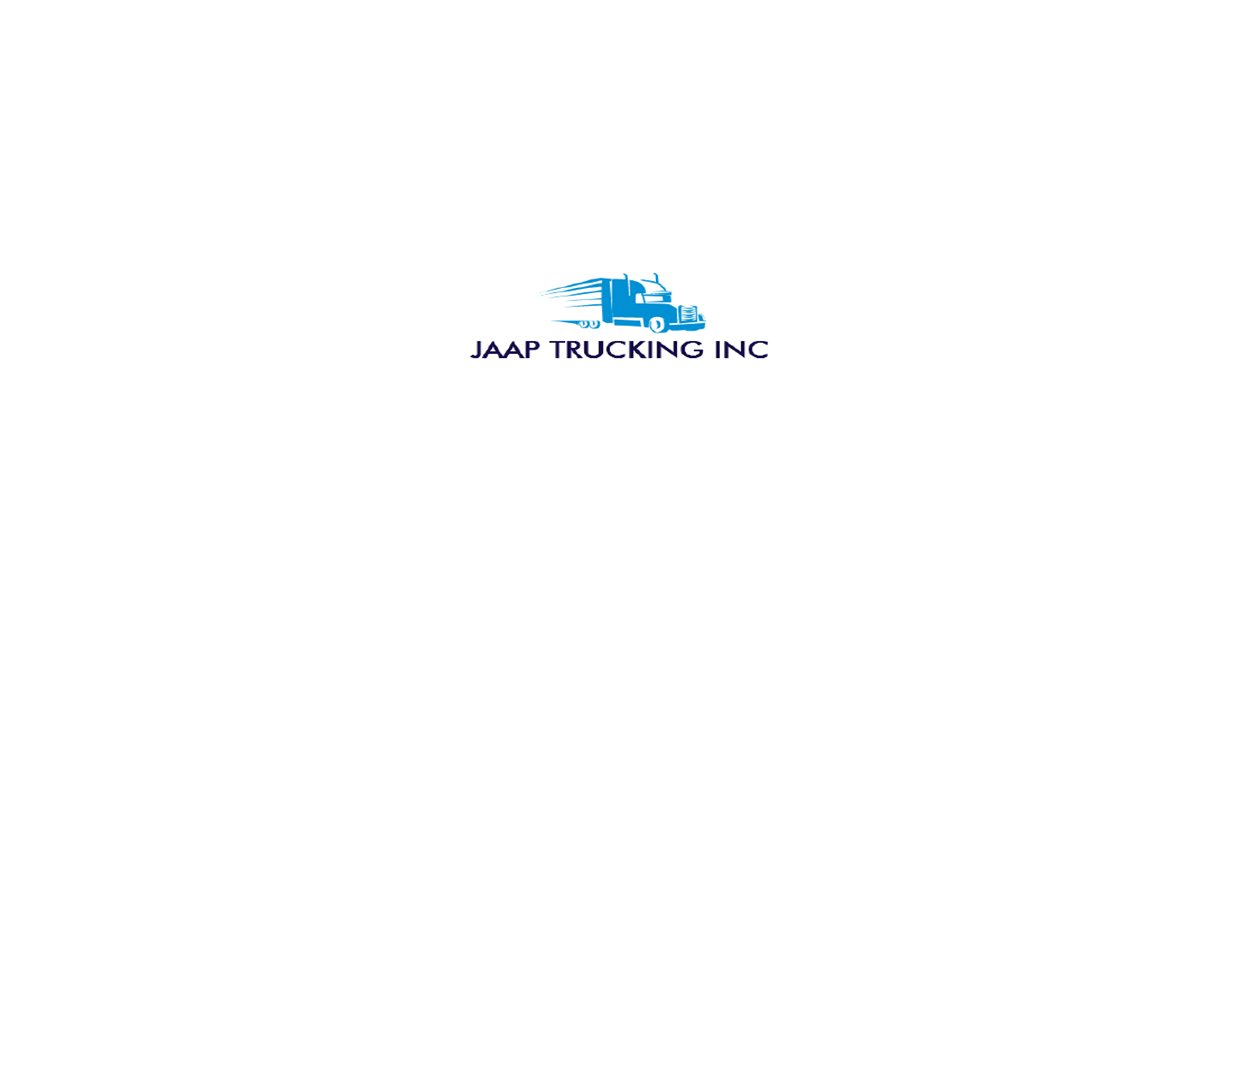 Account Payables & Receivables Jobs in Newark, NJ by JAAP TRUCKING INC - 2 - 5 Yrs of Experience